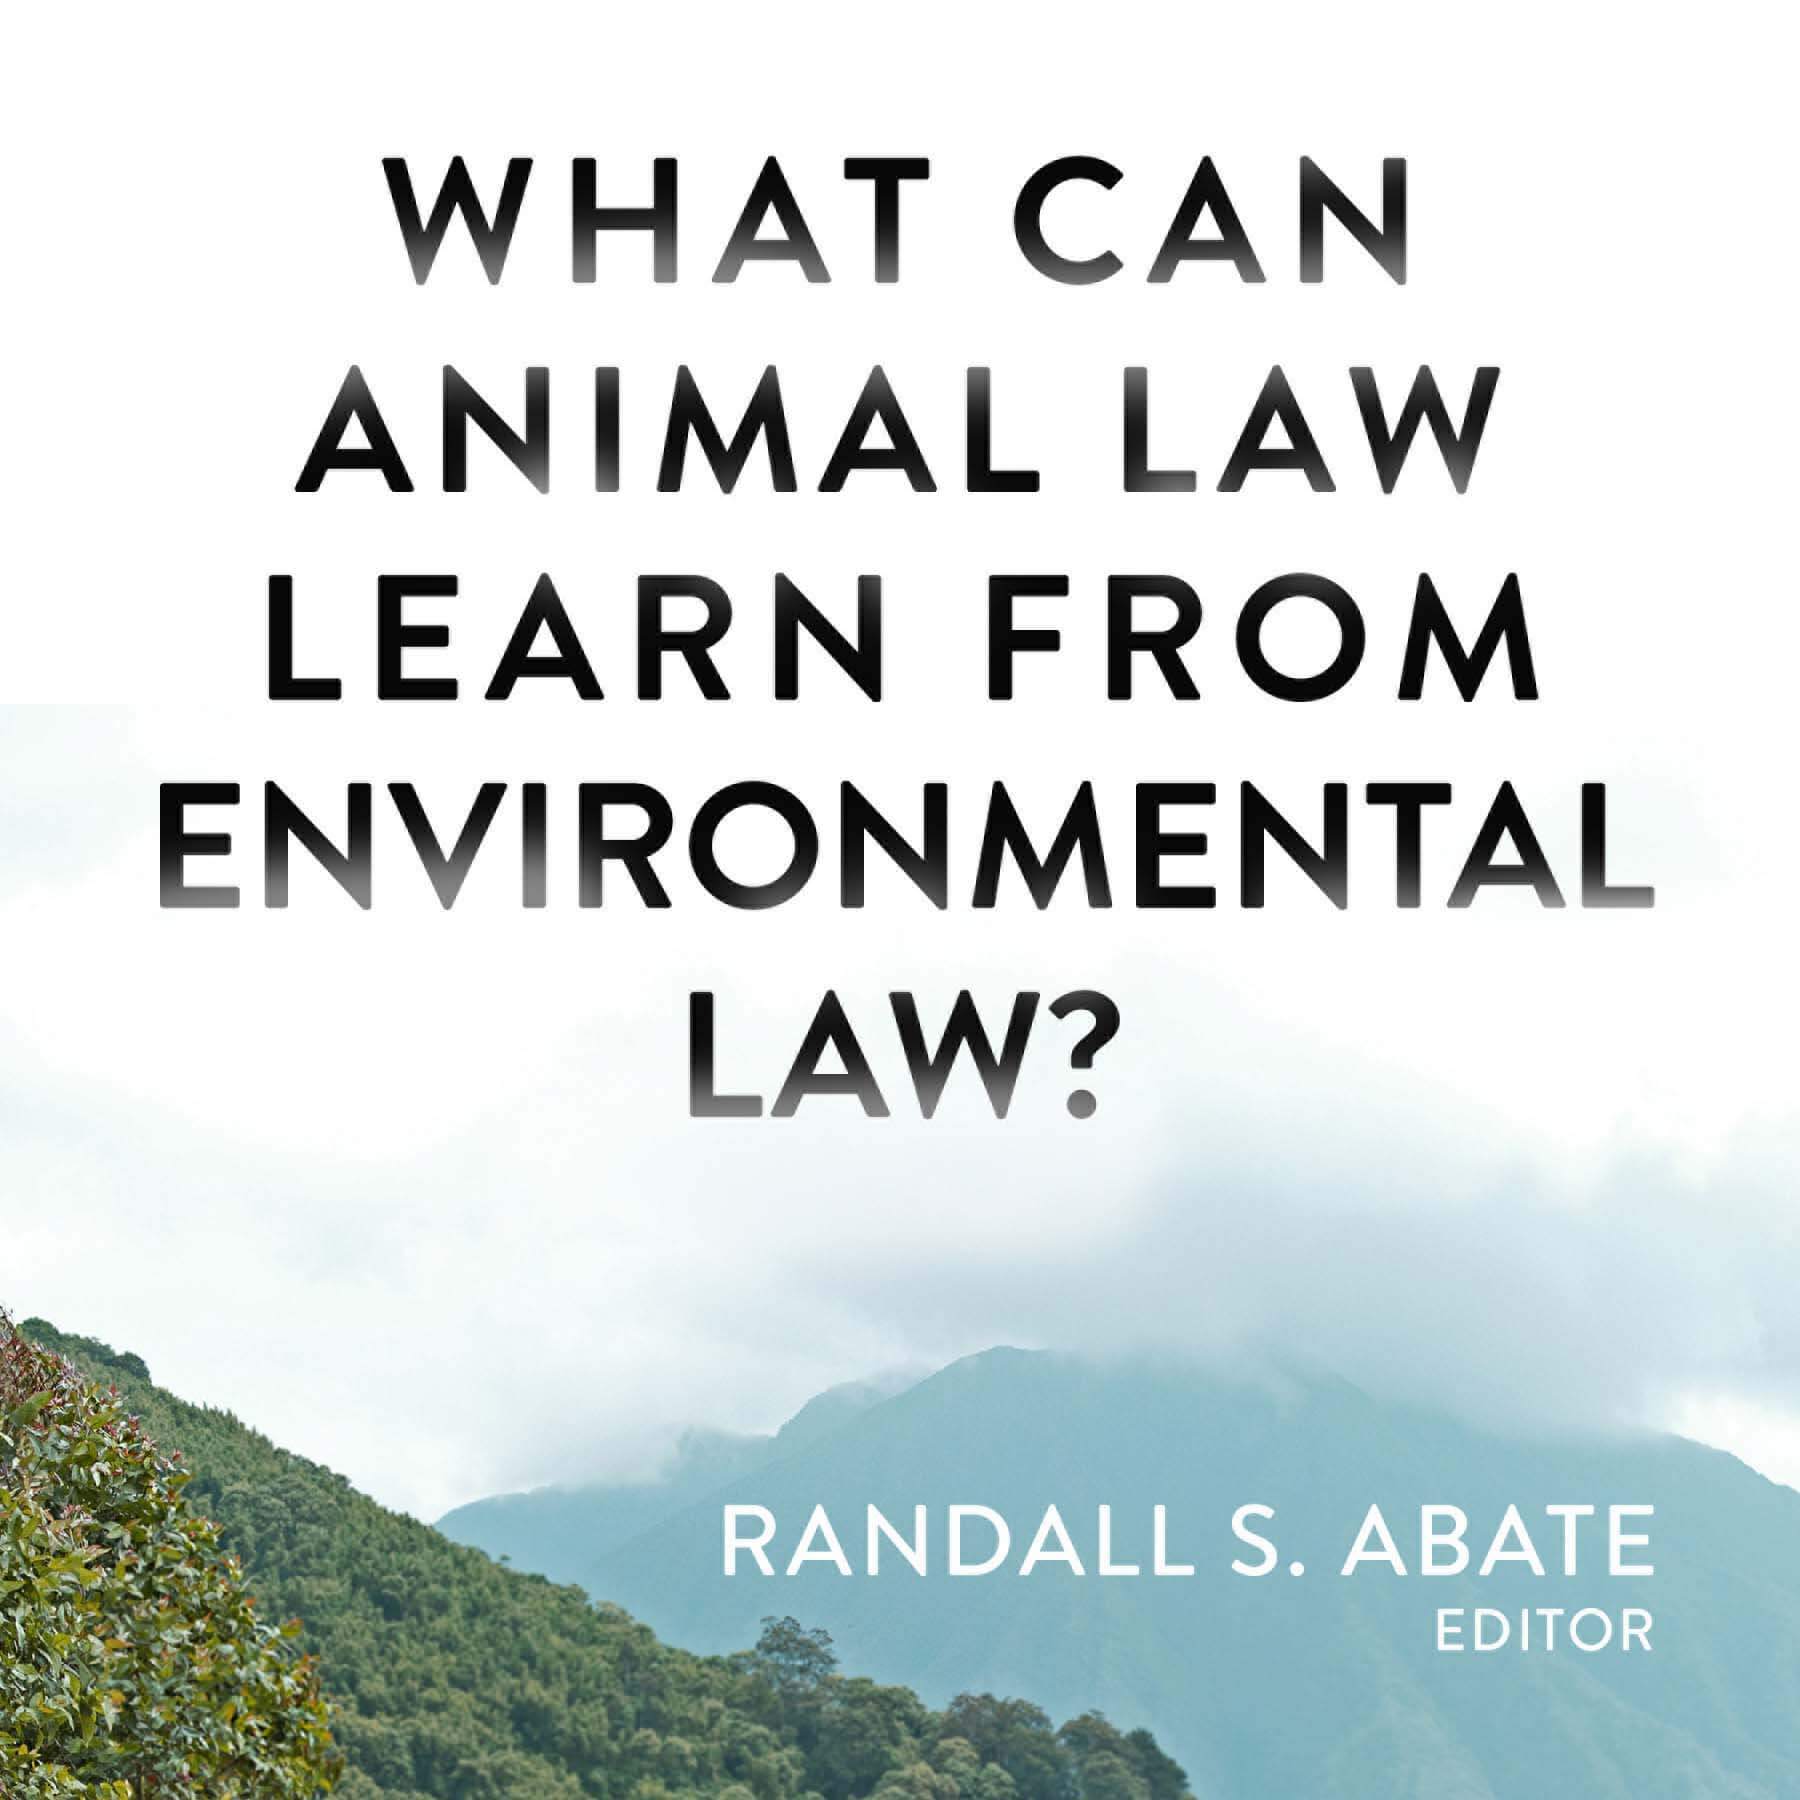 What Can Animal Law Learn From Environmental Law